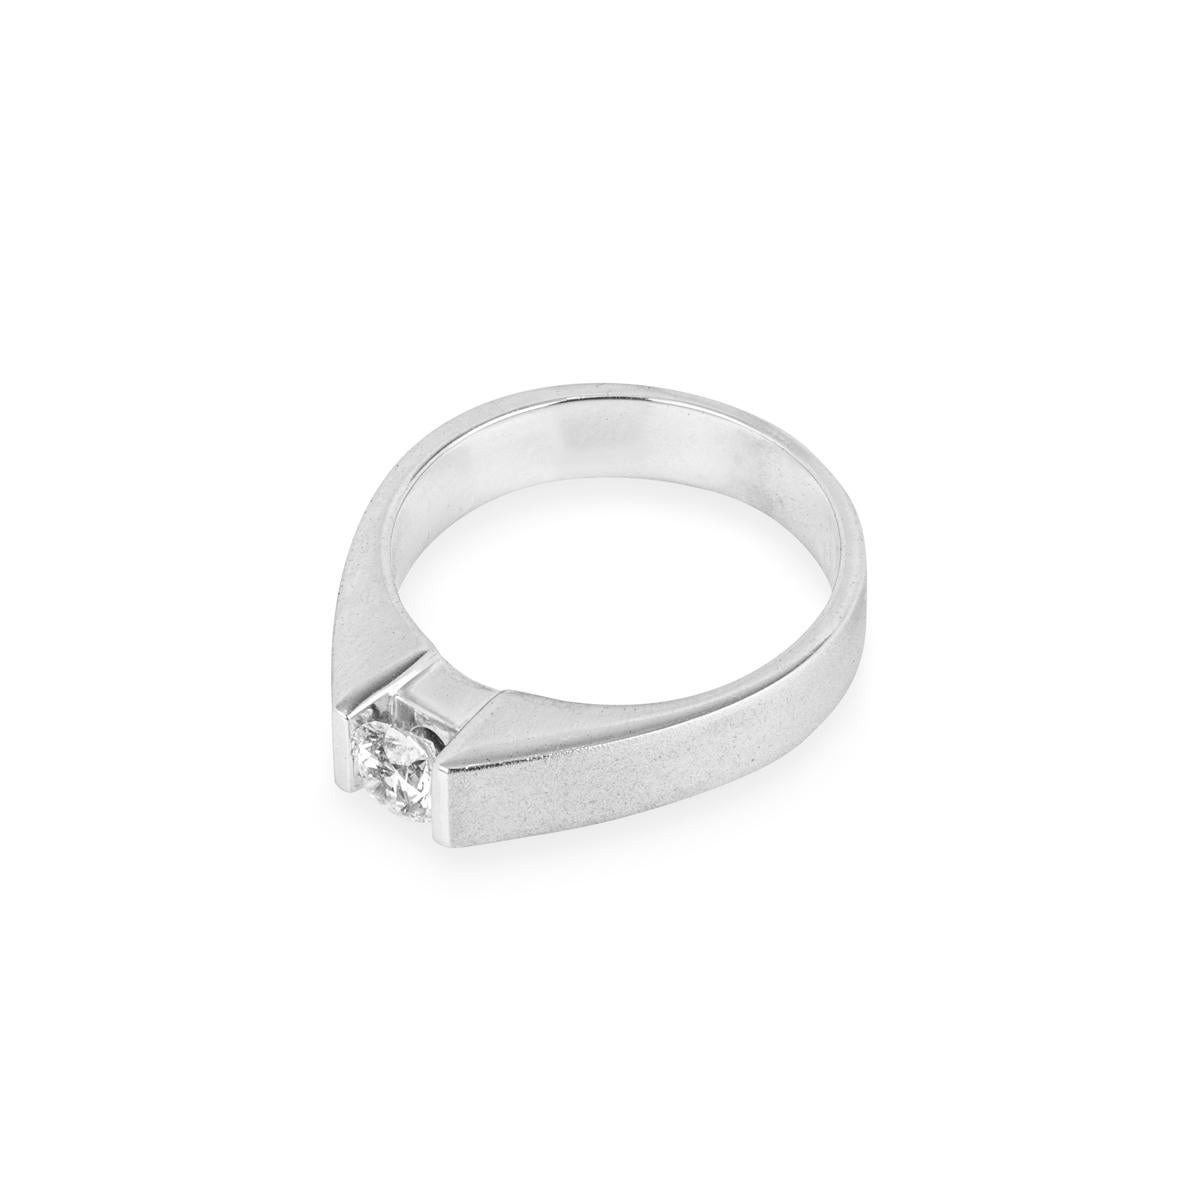 Unisex White Gold Round Brilliant Cut Diamond Ring 0.47ct H/SI1 In New Condition For Sale In London, GB